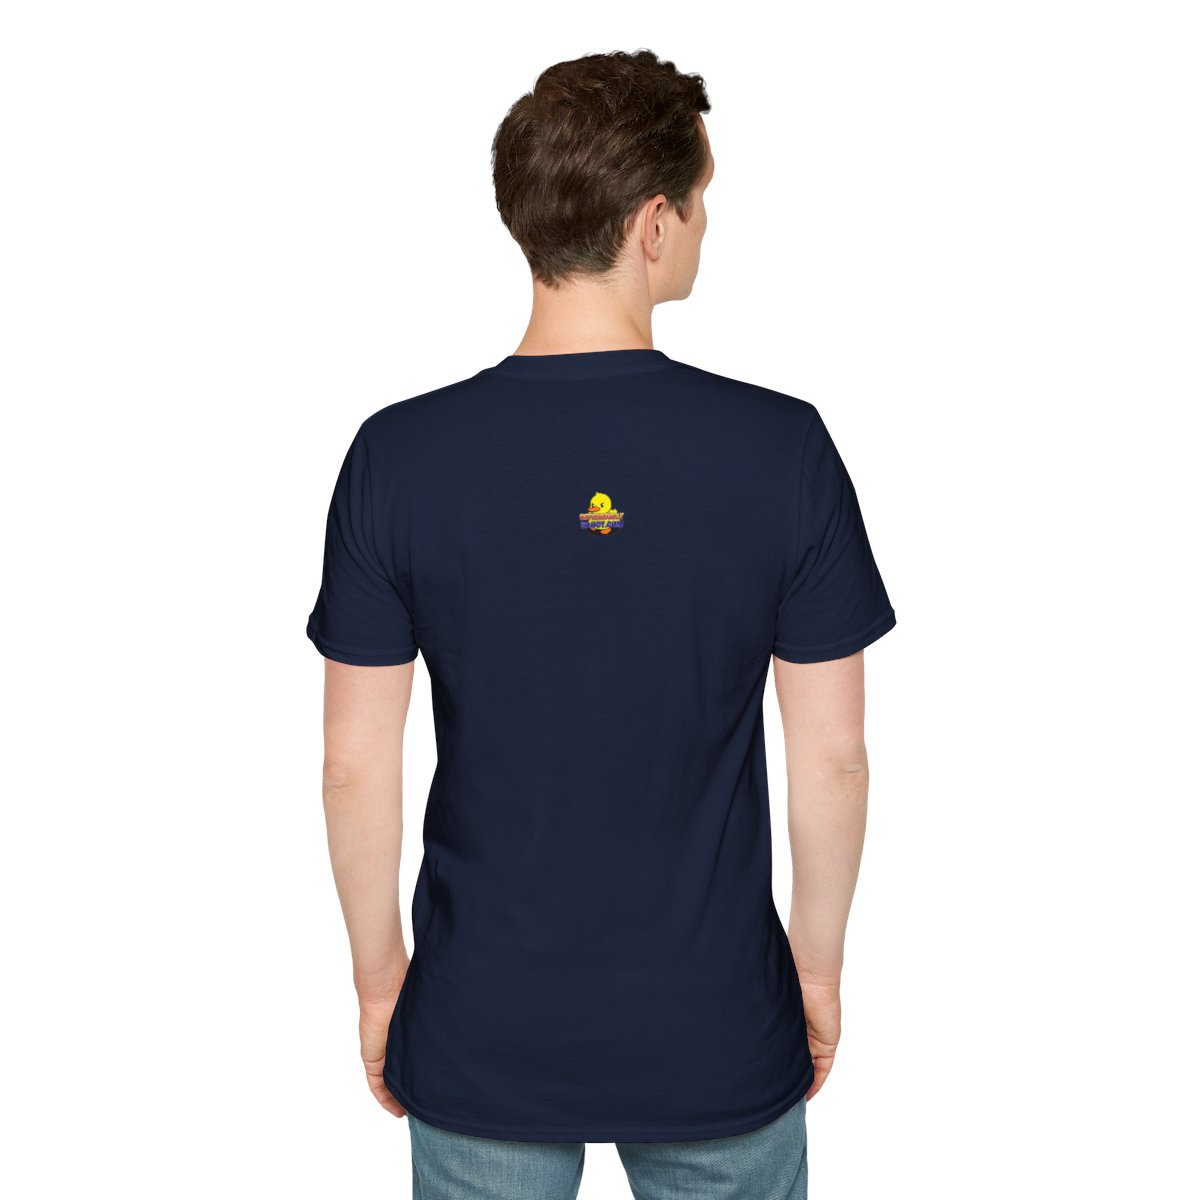 I Tried It At Home T-Shirt product thumbnail image